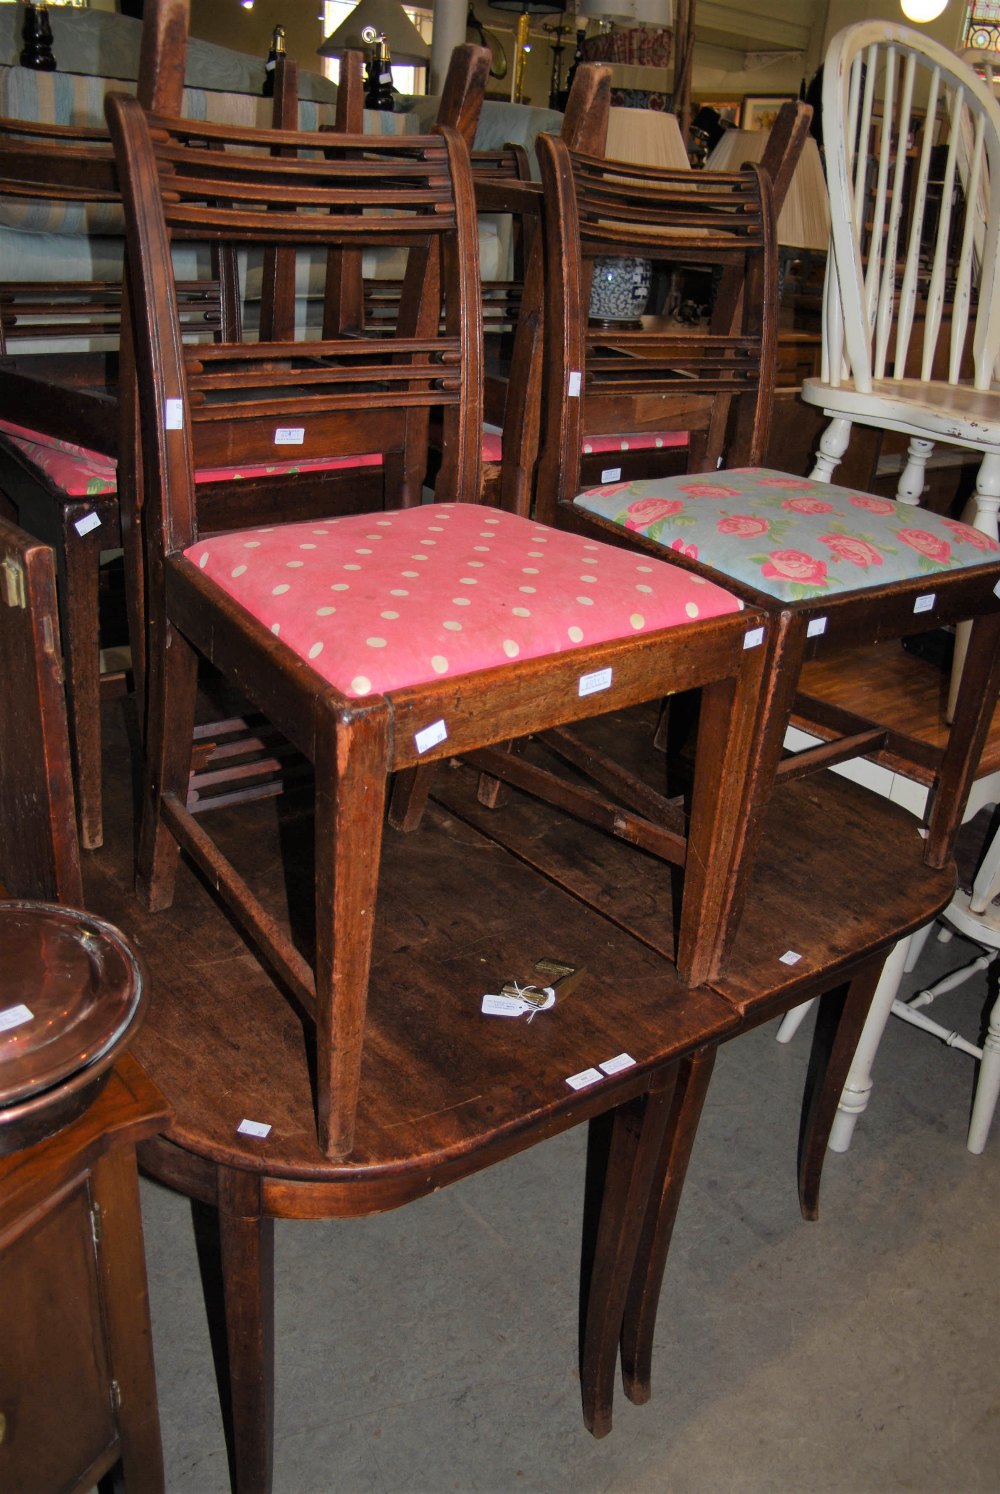 A 19TH CENTURY MAHOGANY D-END DINING TABLE WITH SINGLE LEAF AND SIX MATCHING CHAIRS